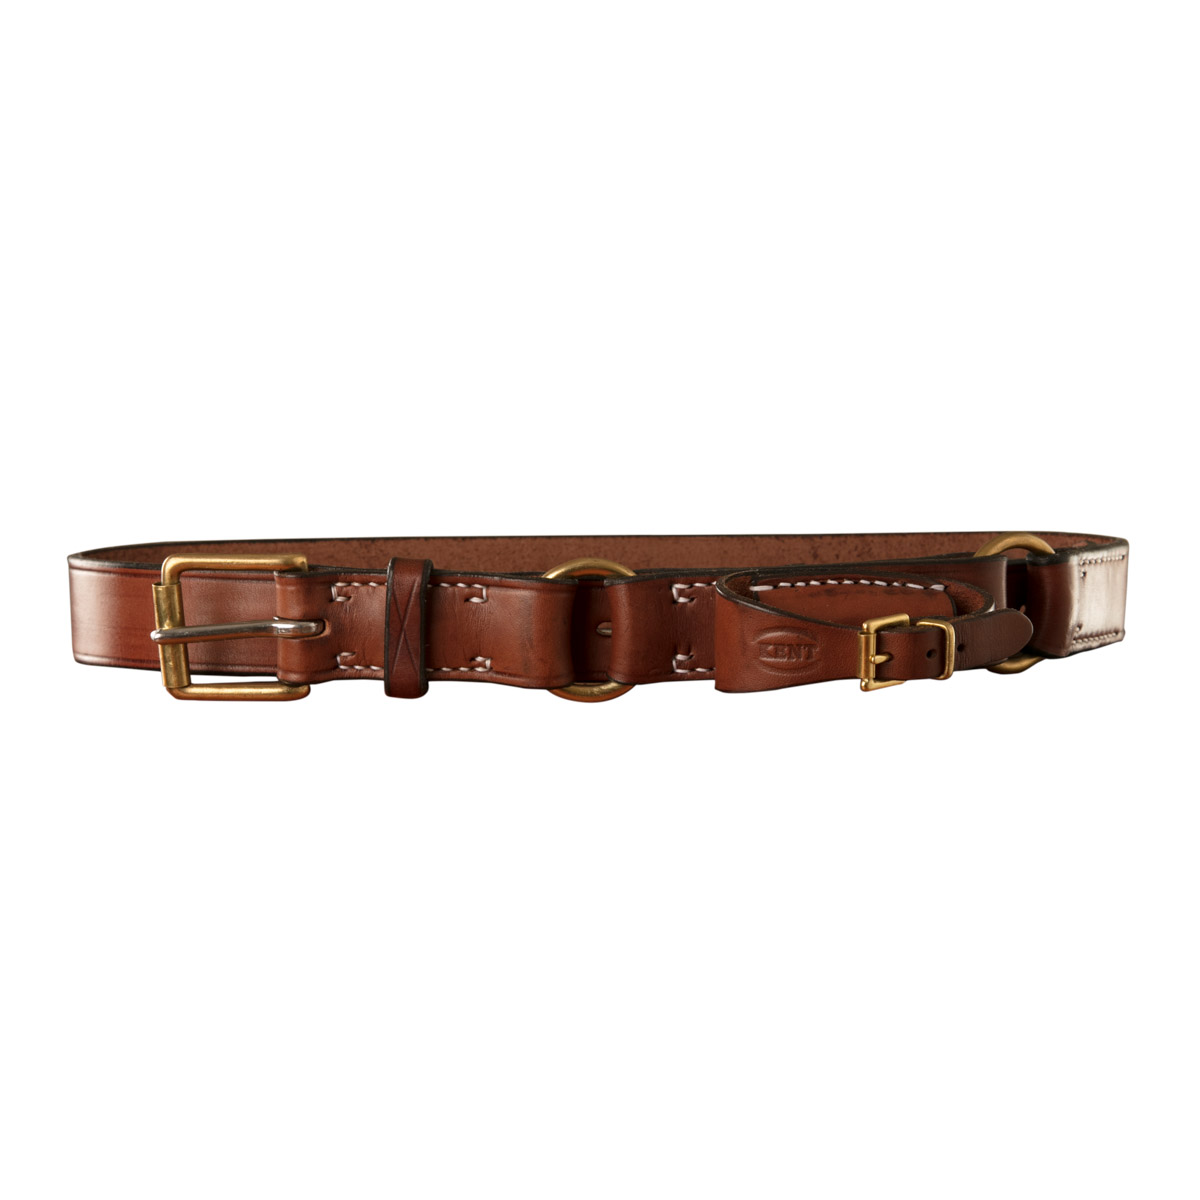 Stockmans Hobble Style Belt, Solid Leather, with Brass Roller Buckle, 2 Rings and Pouch for Pocket Knife 1